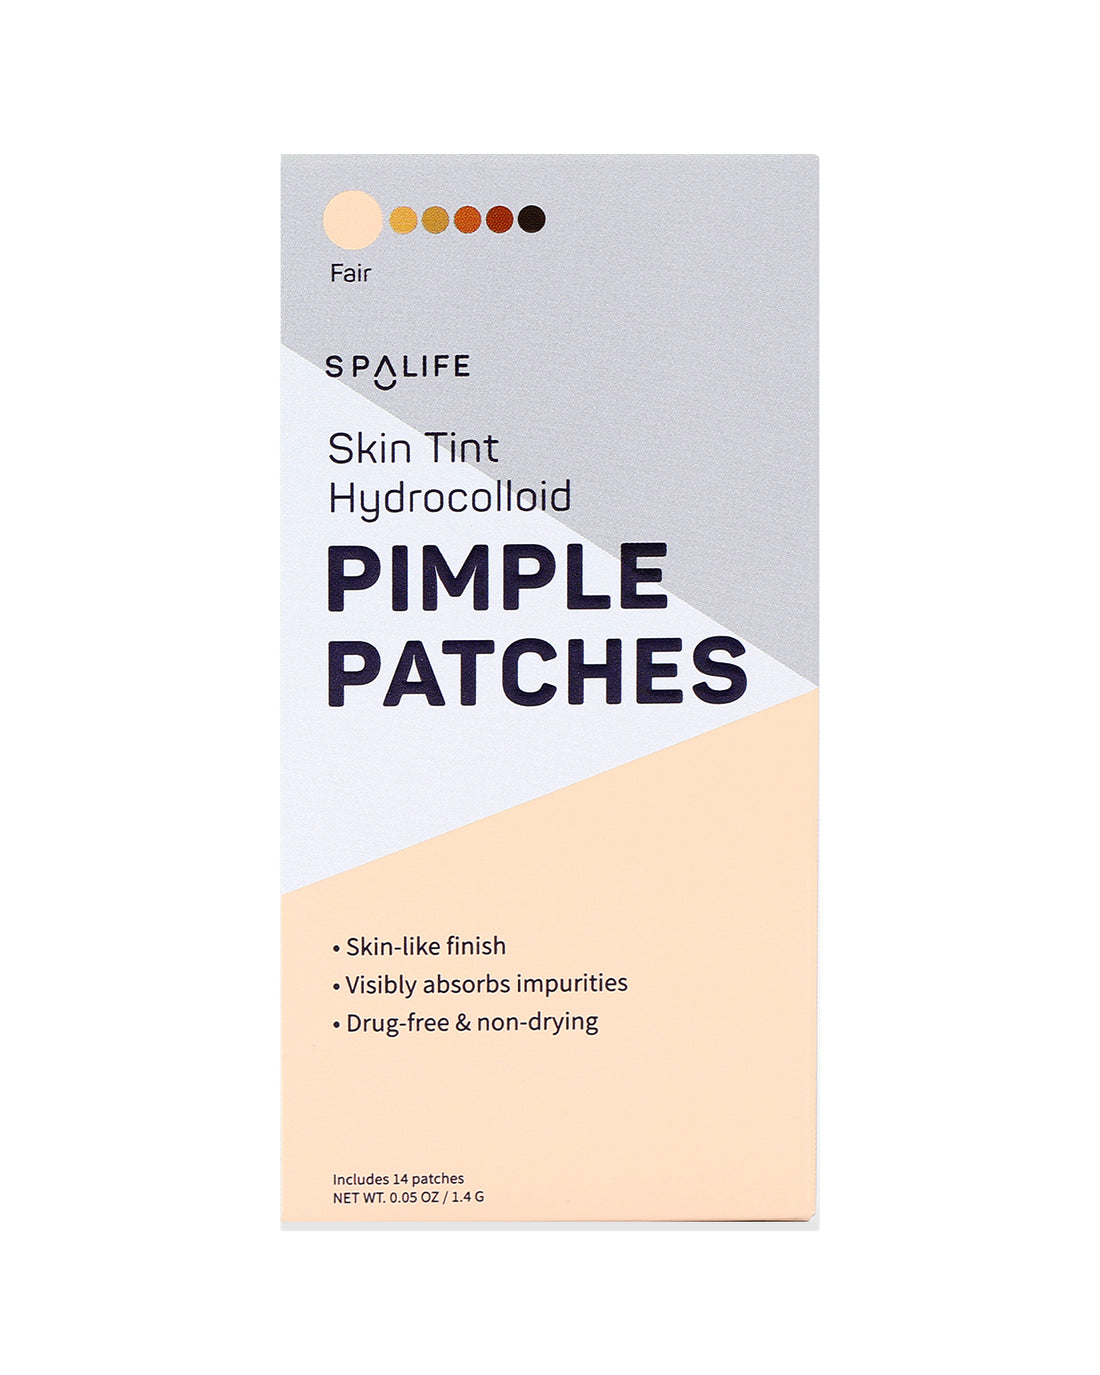 Skin_tint_pimple_patches_packe-970